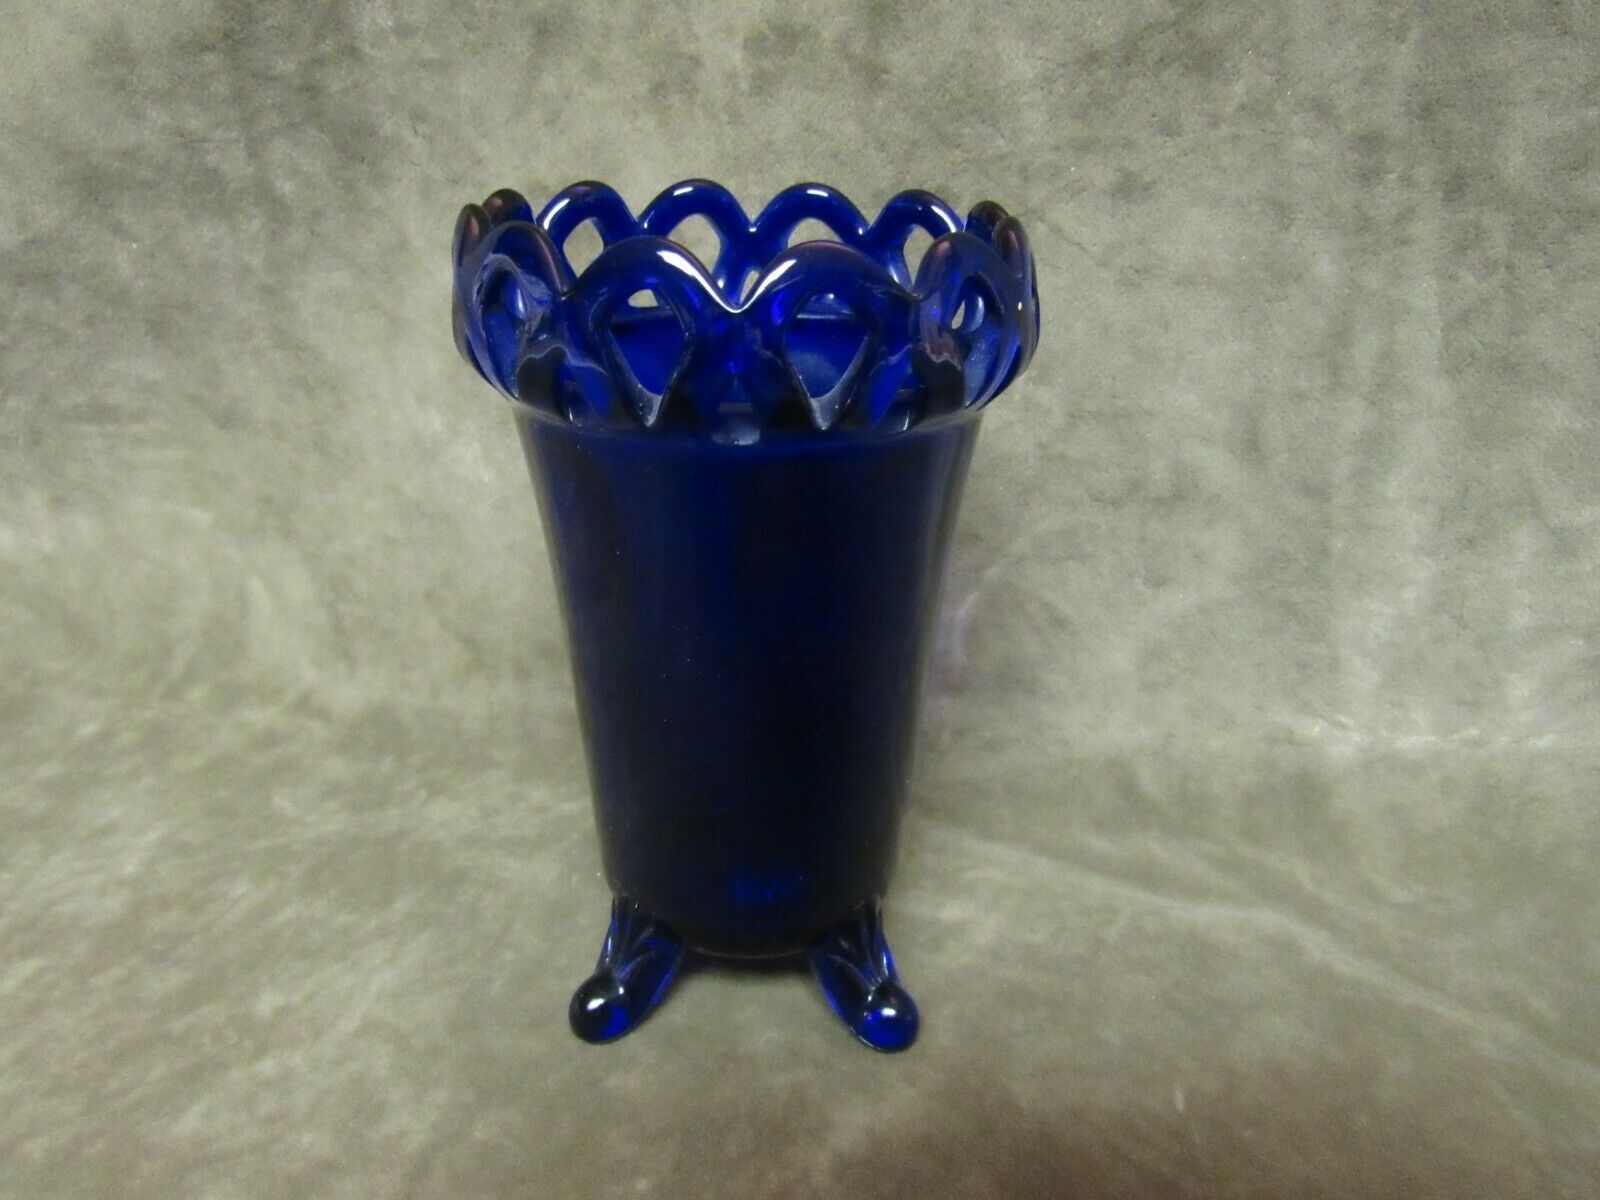 Circa 1950's Imperial Glass Lace Edge Cobalt Blue Color Rib Optic Footed Vase